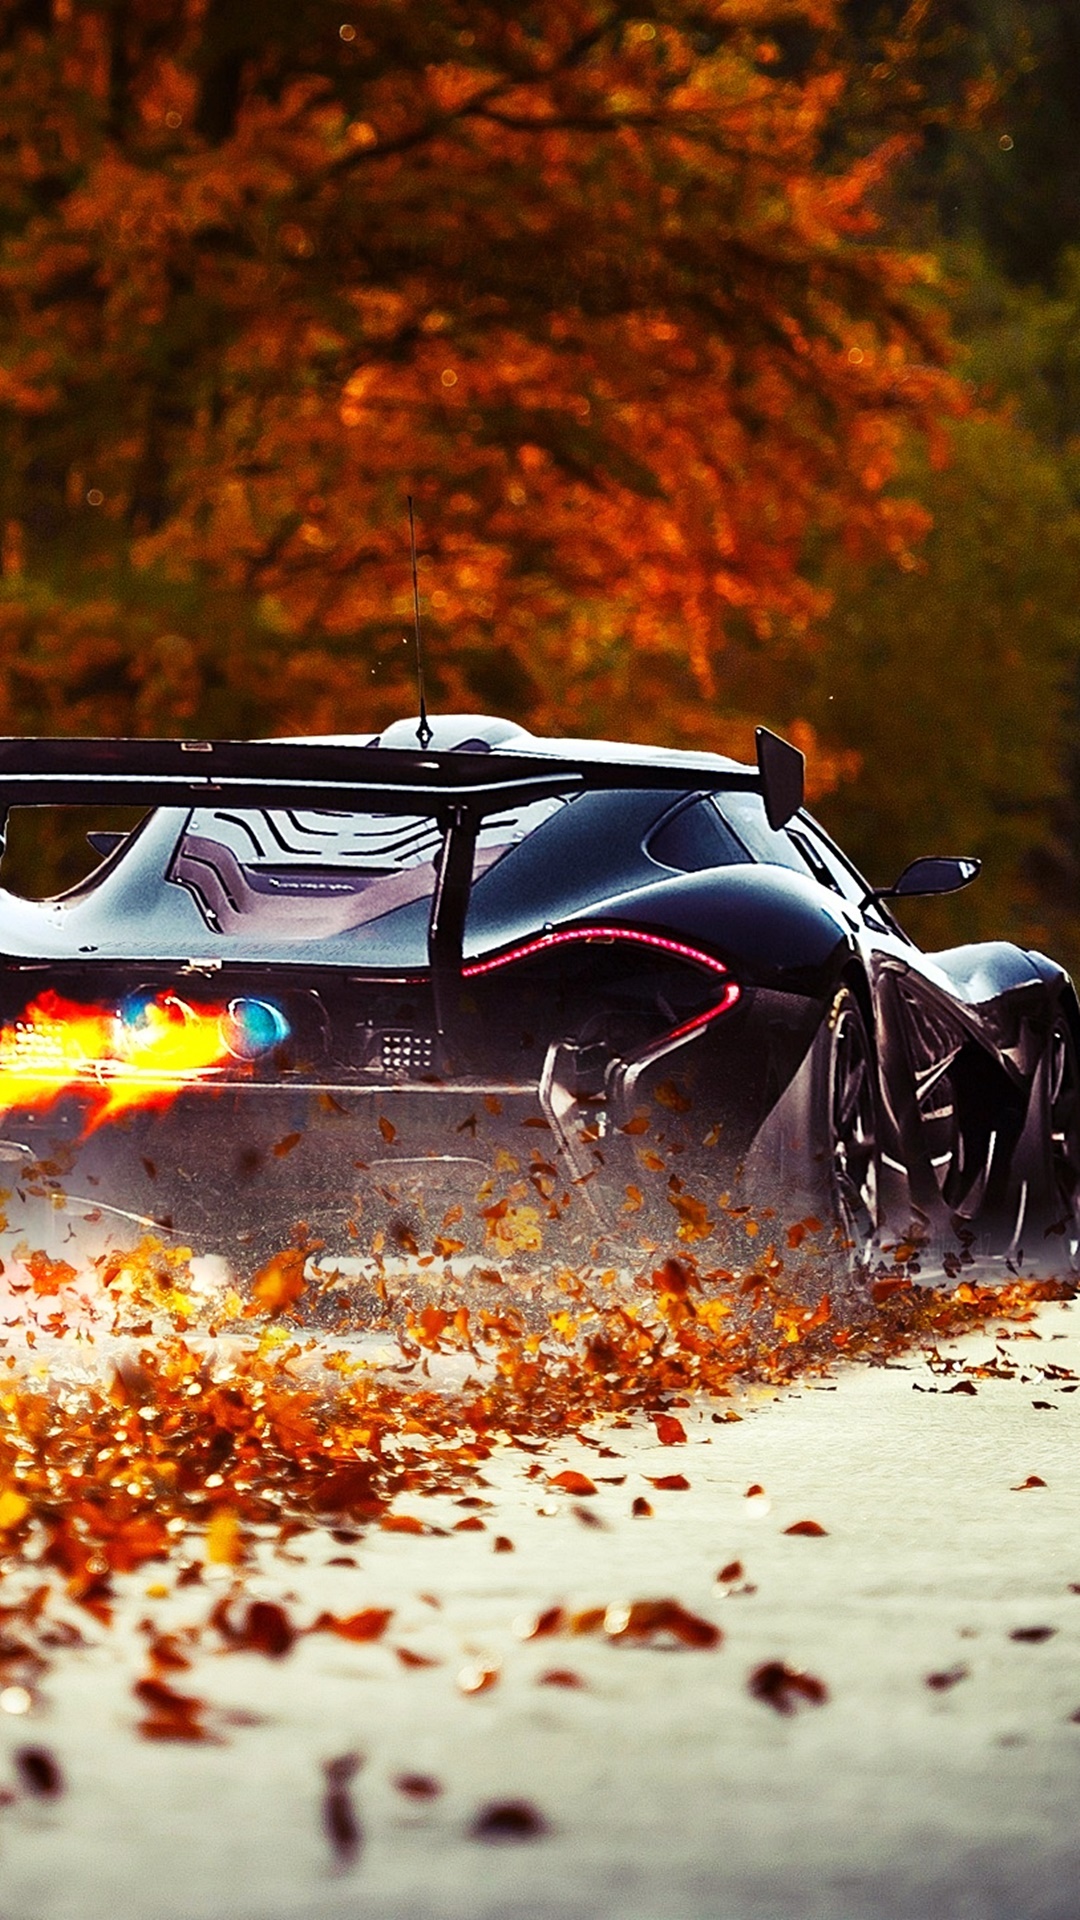 Autumn and cars wallpapers